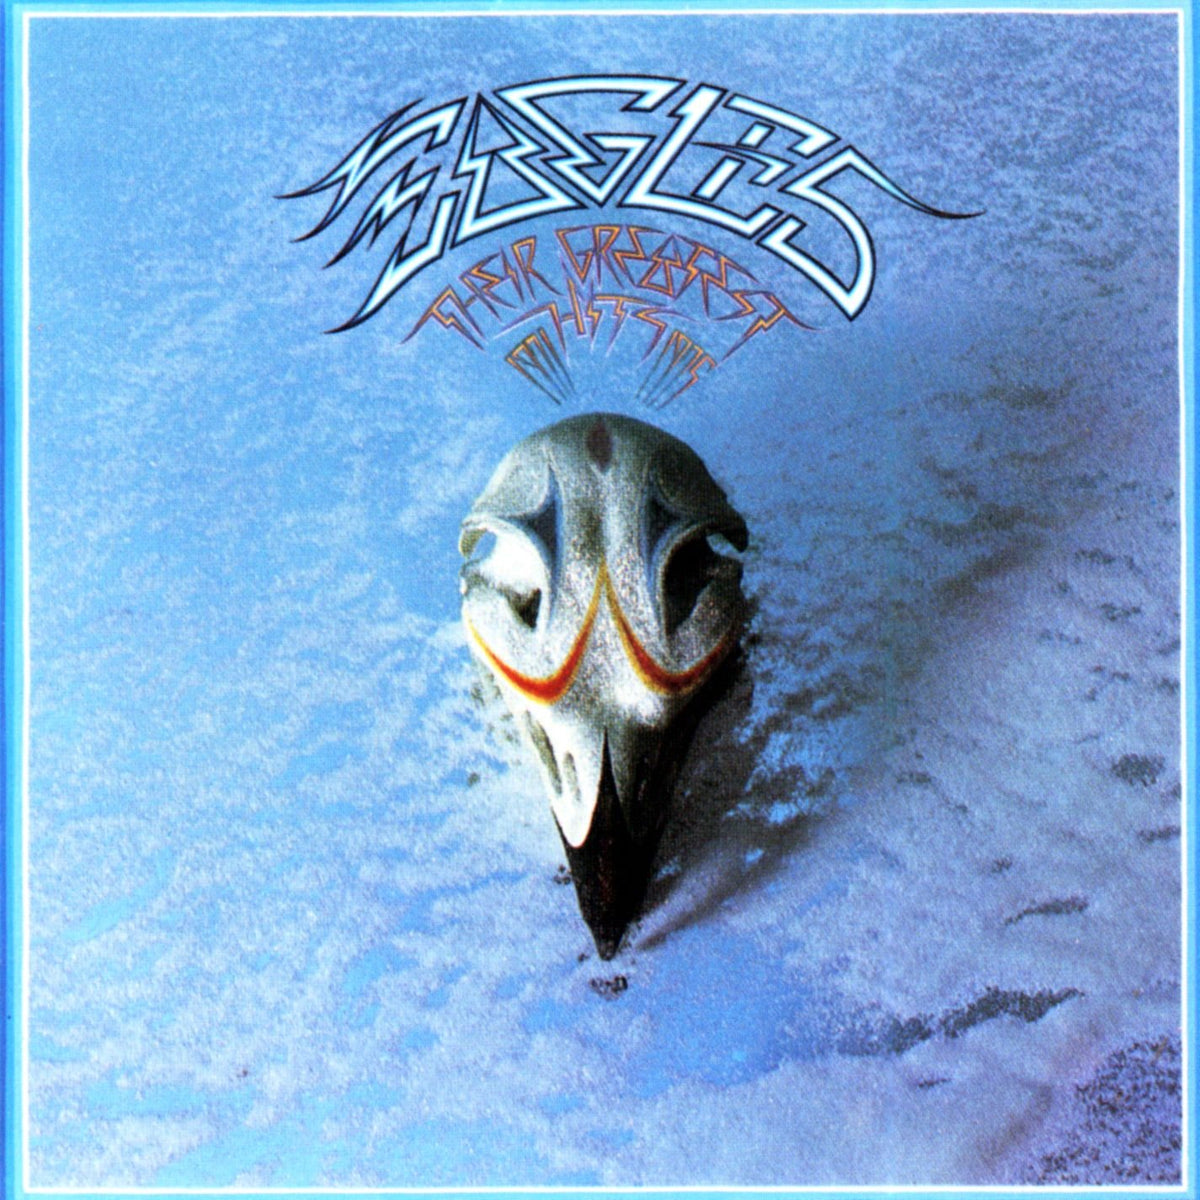 The Eagles - Their Greatest Hits 1971-1975 LP (180g)